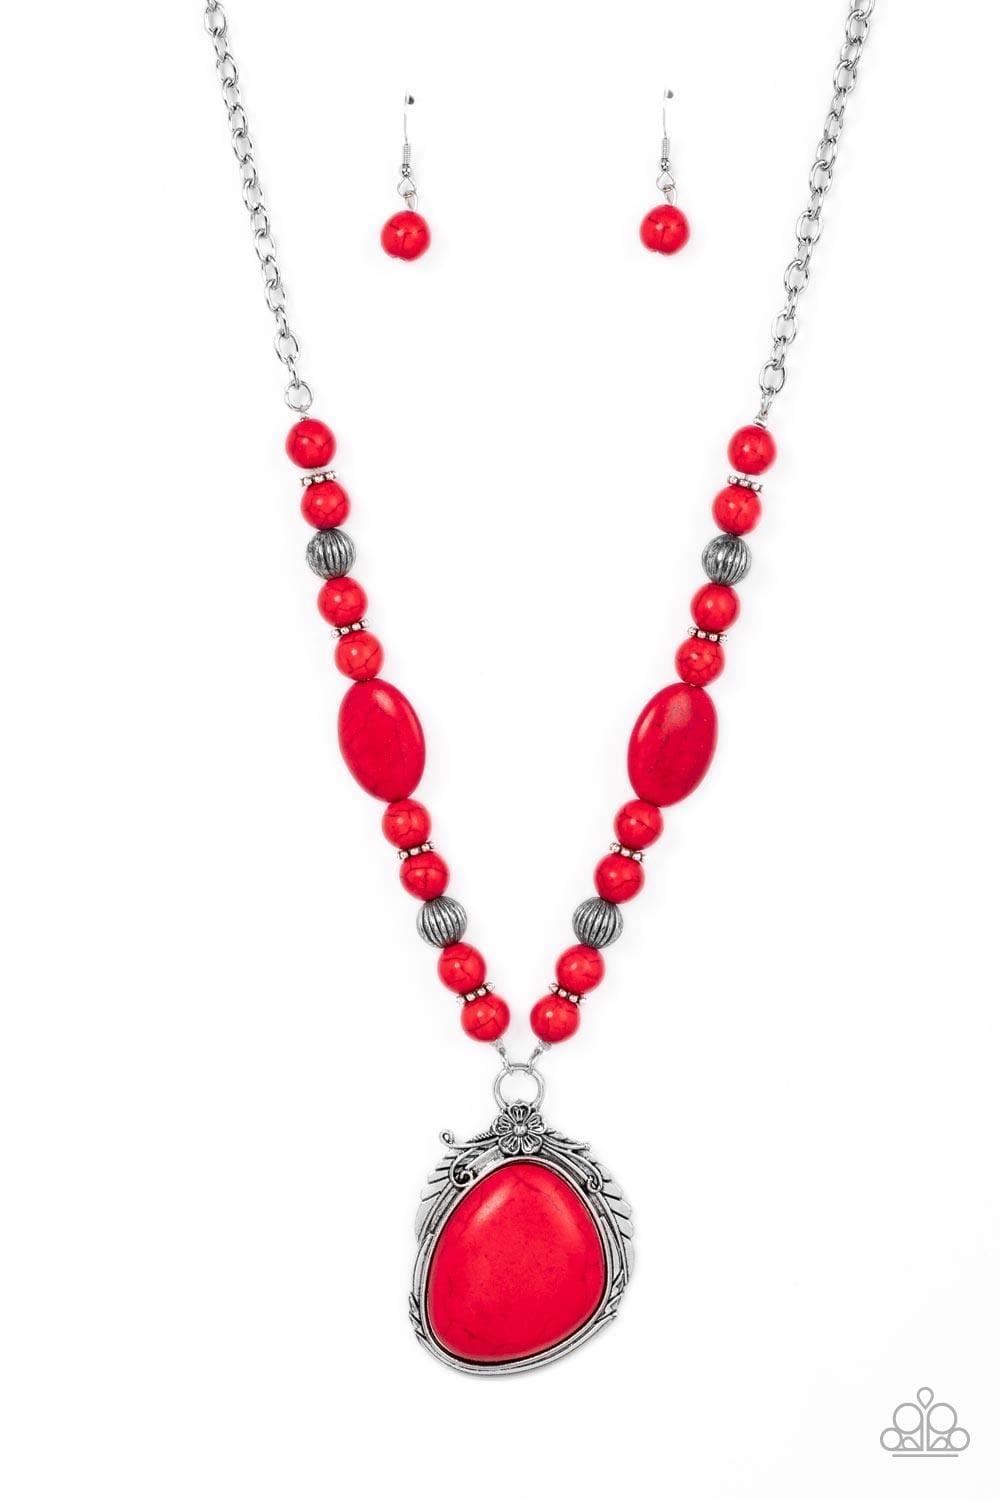 Paparazzi Accessories - Southwest Paradise - Red Necklace - Bling by JessieK